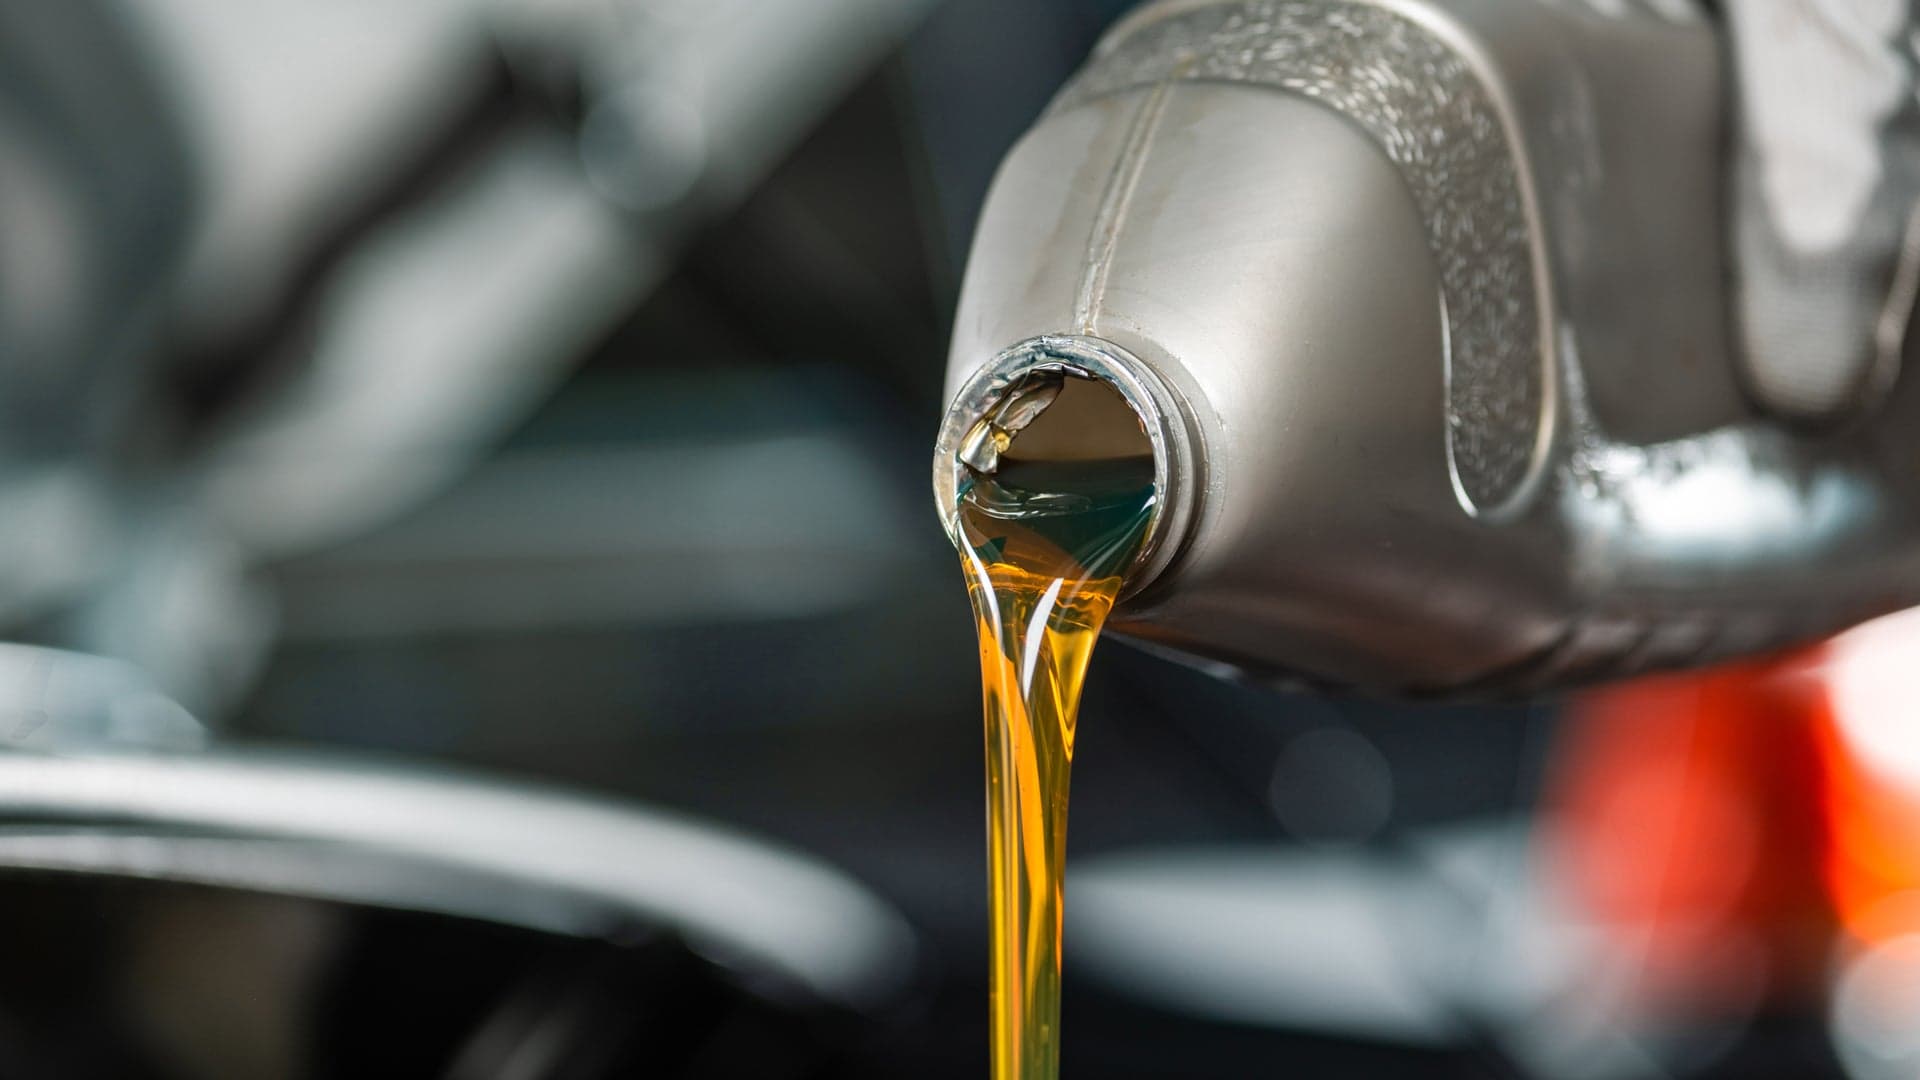 How Often Should I Change Synthetic Oil?